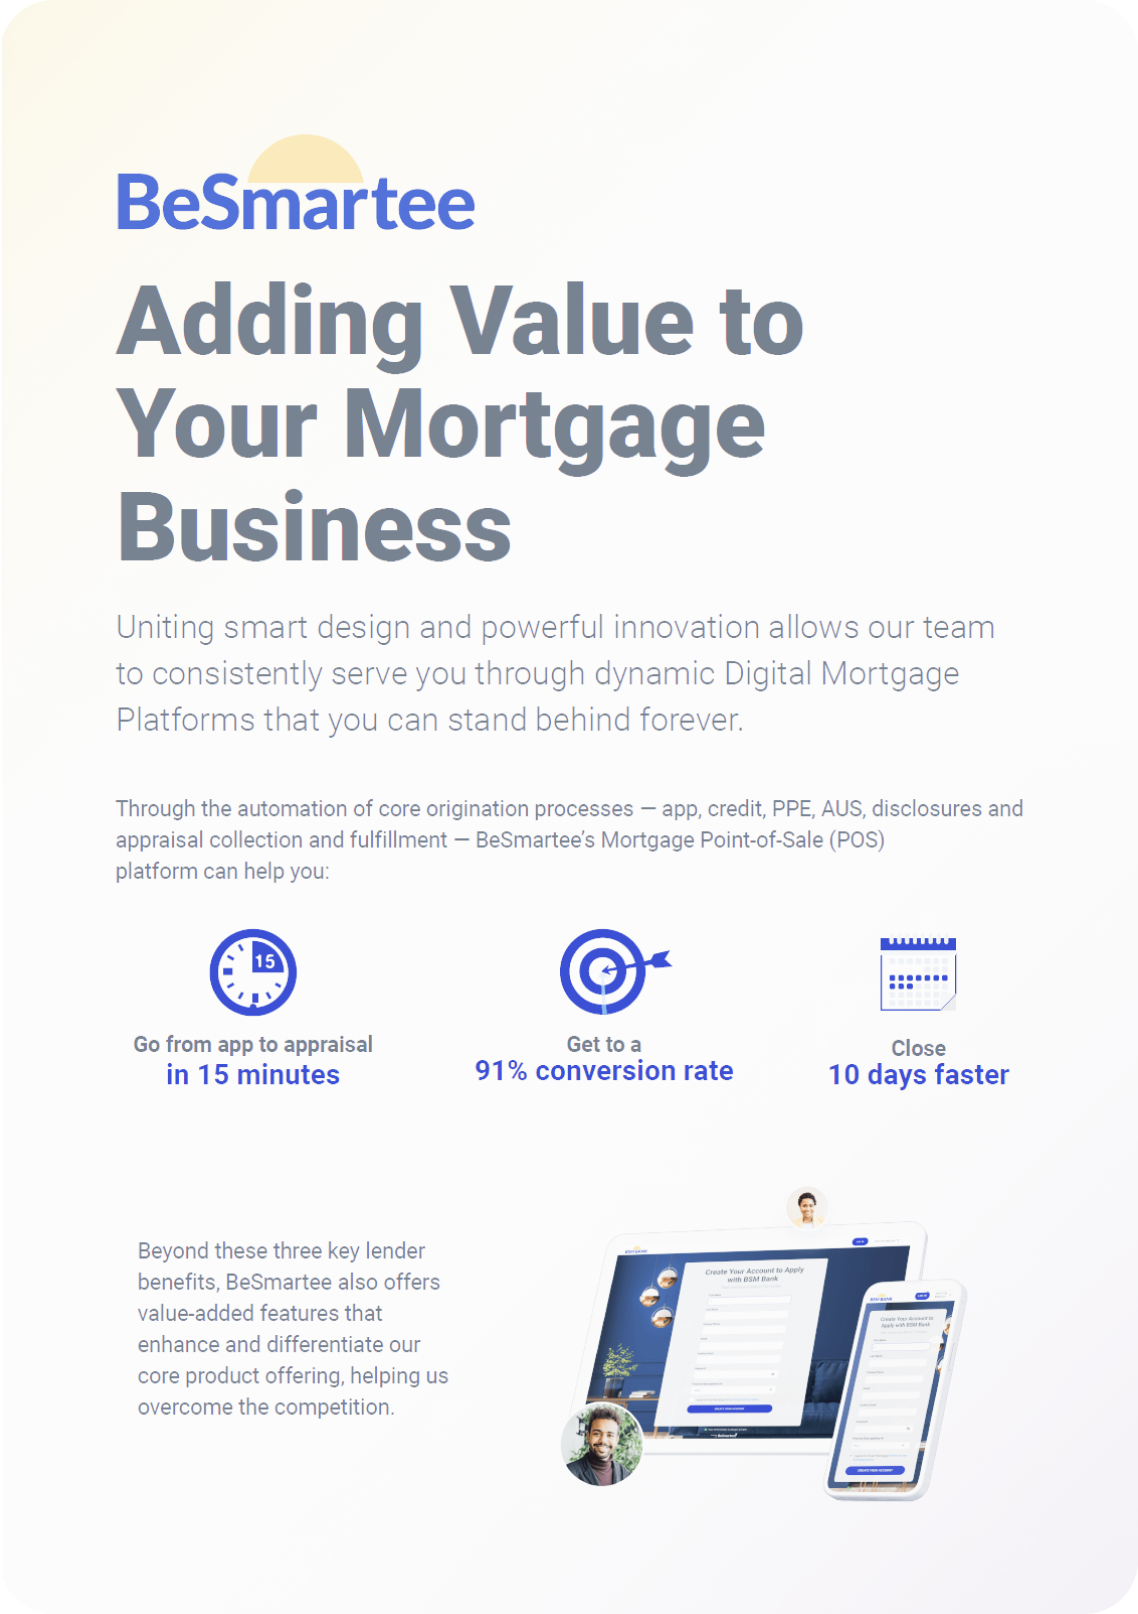 Adding Value to Your Mortgage Business